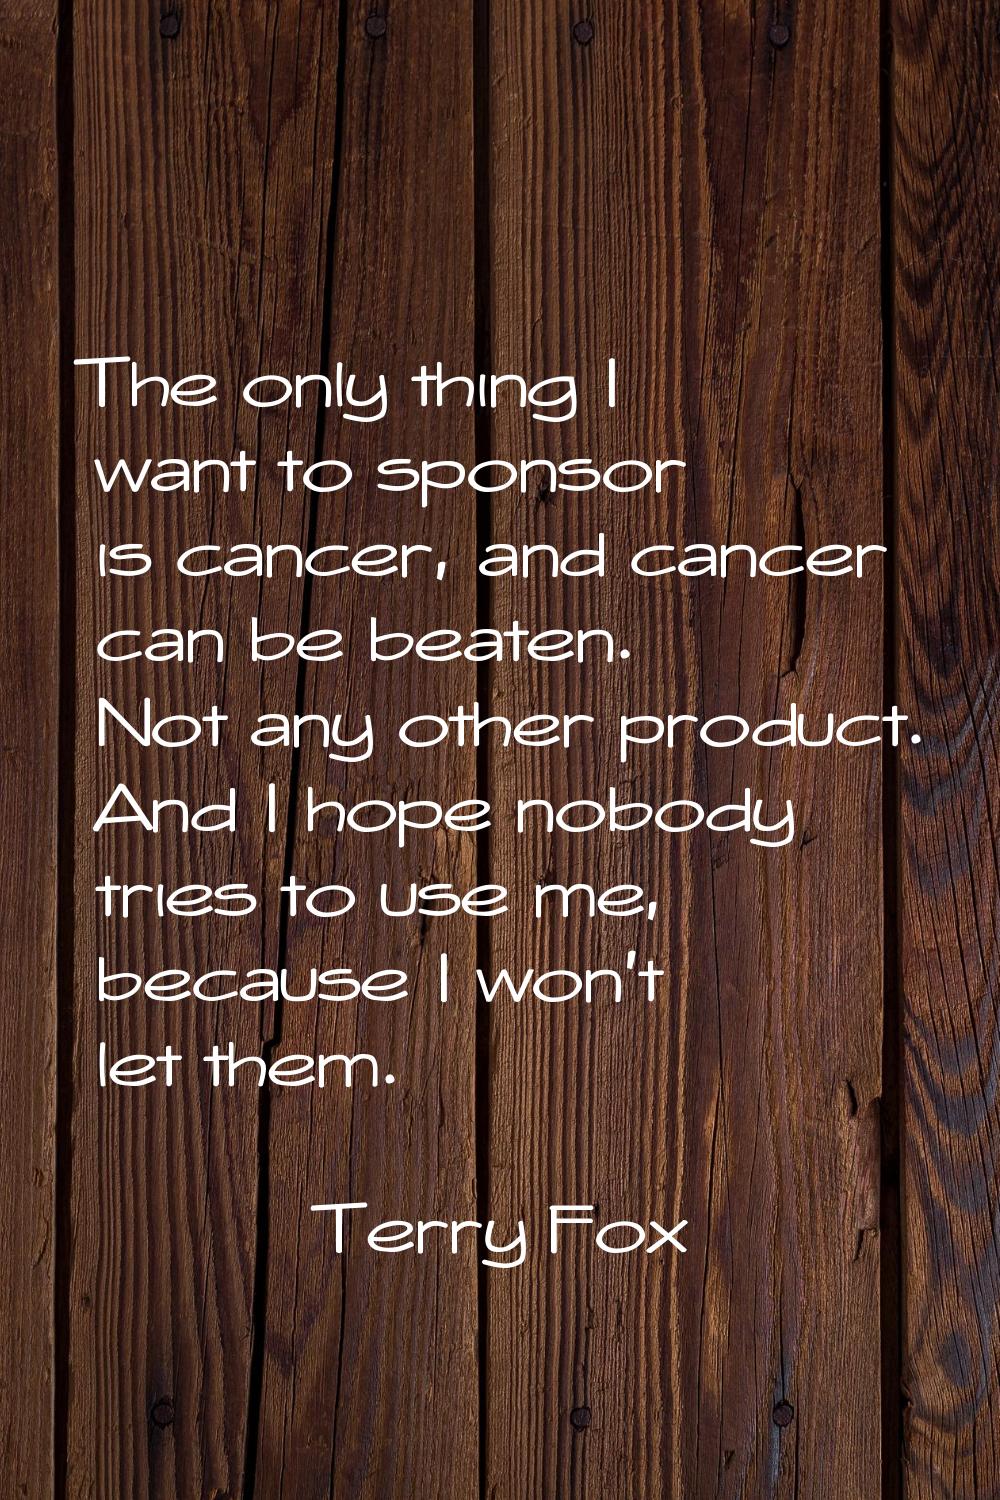 The only thing I want to sponsor is cancer, and cancer can be beaten. Not any other product. And I 